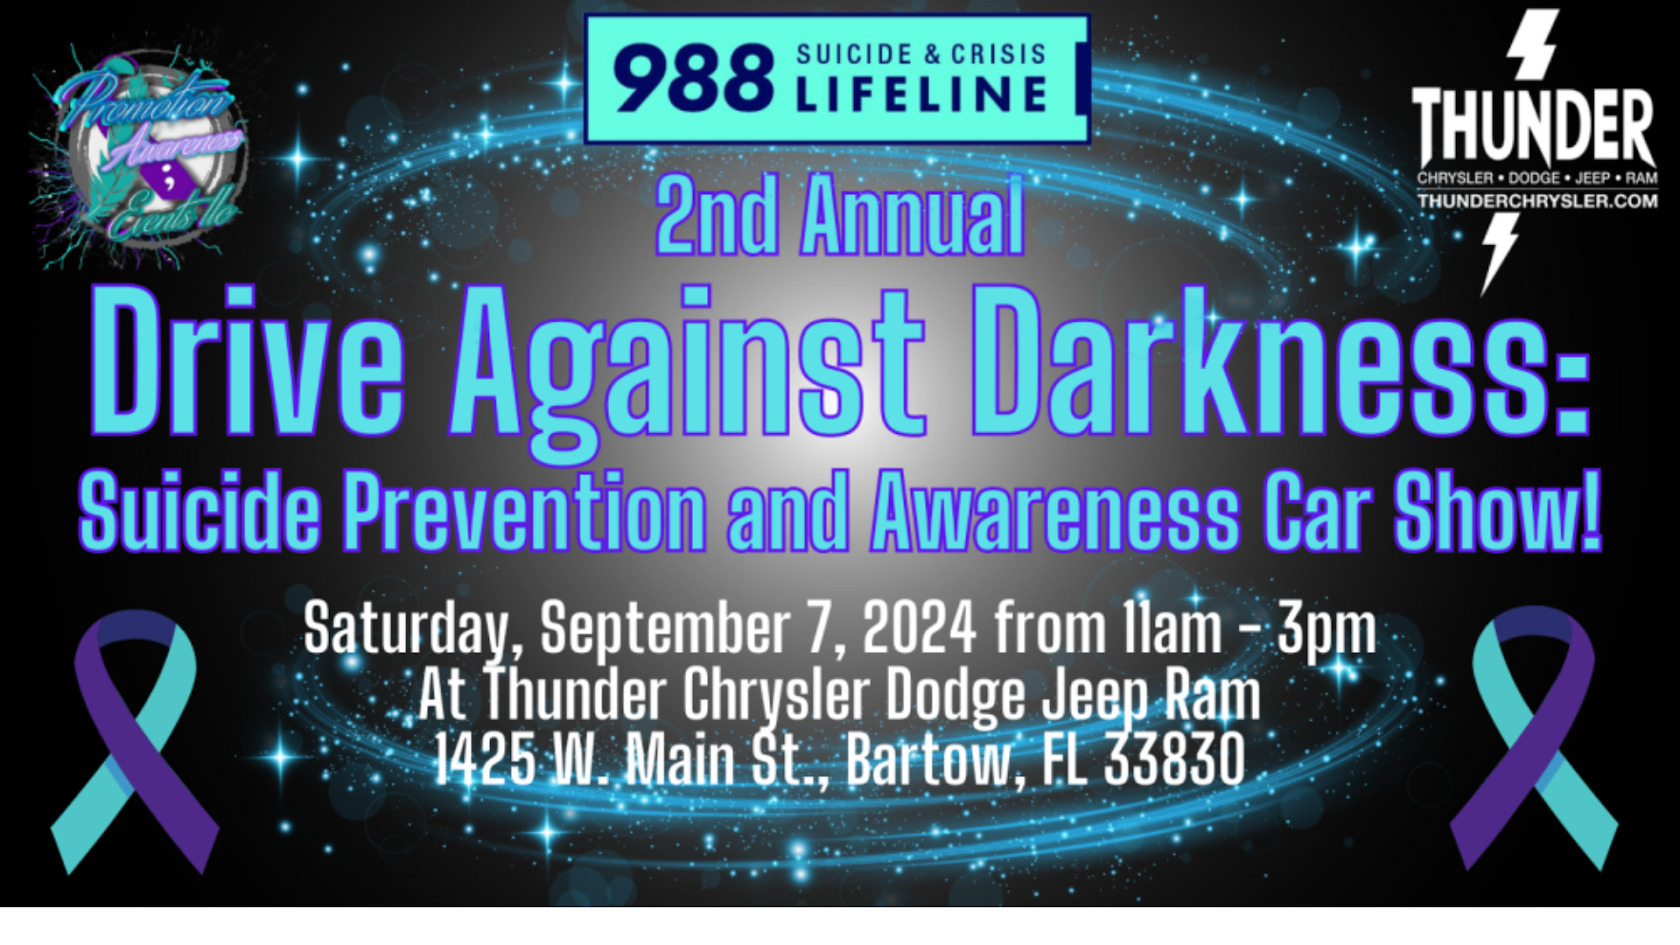 Drive Against Darkness: Suicide Prevention and Awareness Car Show!